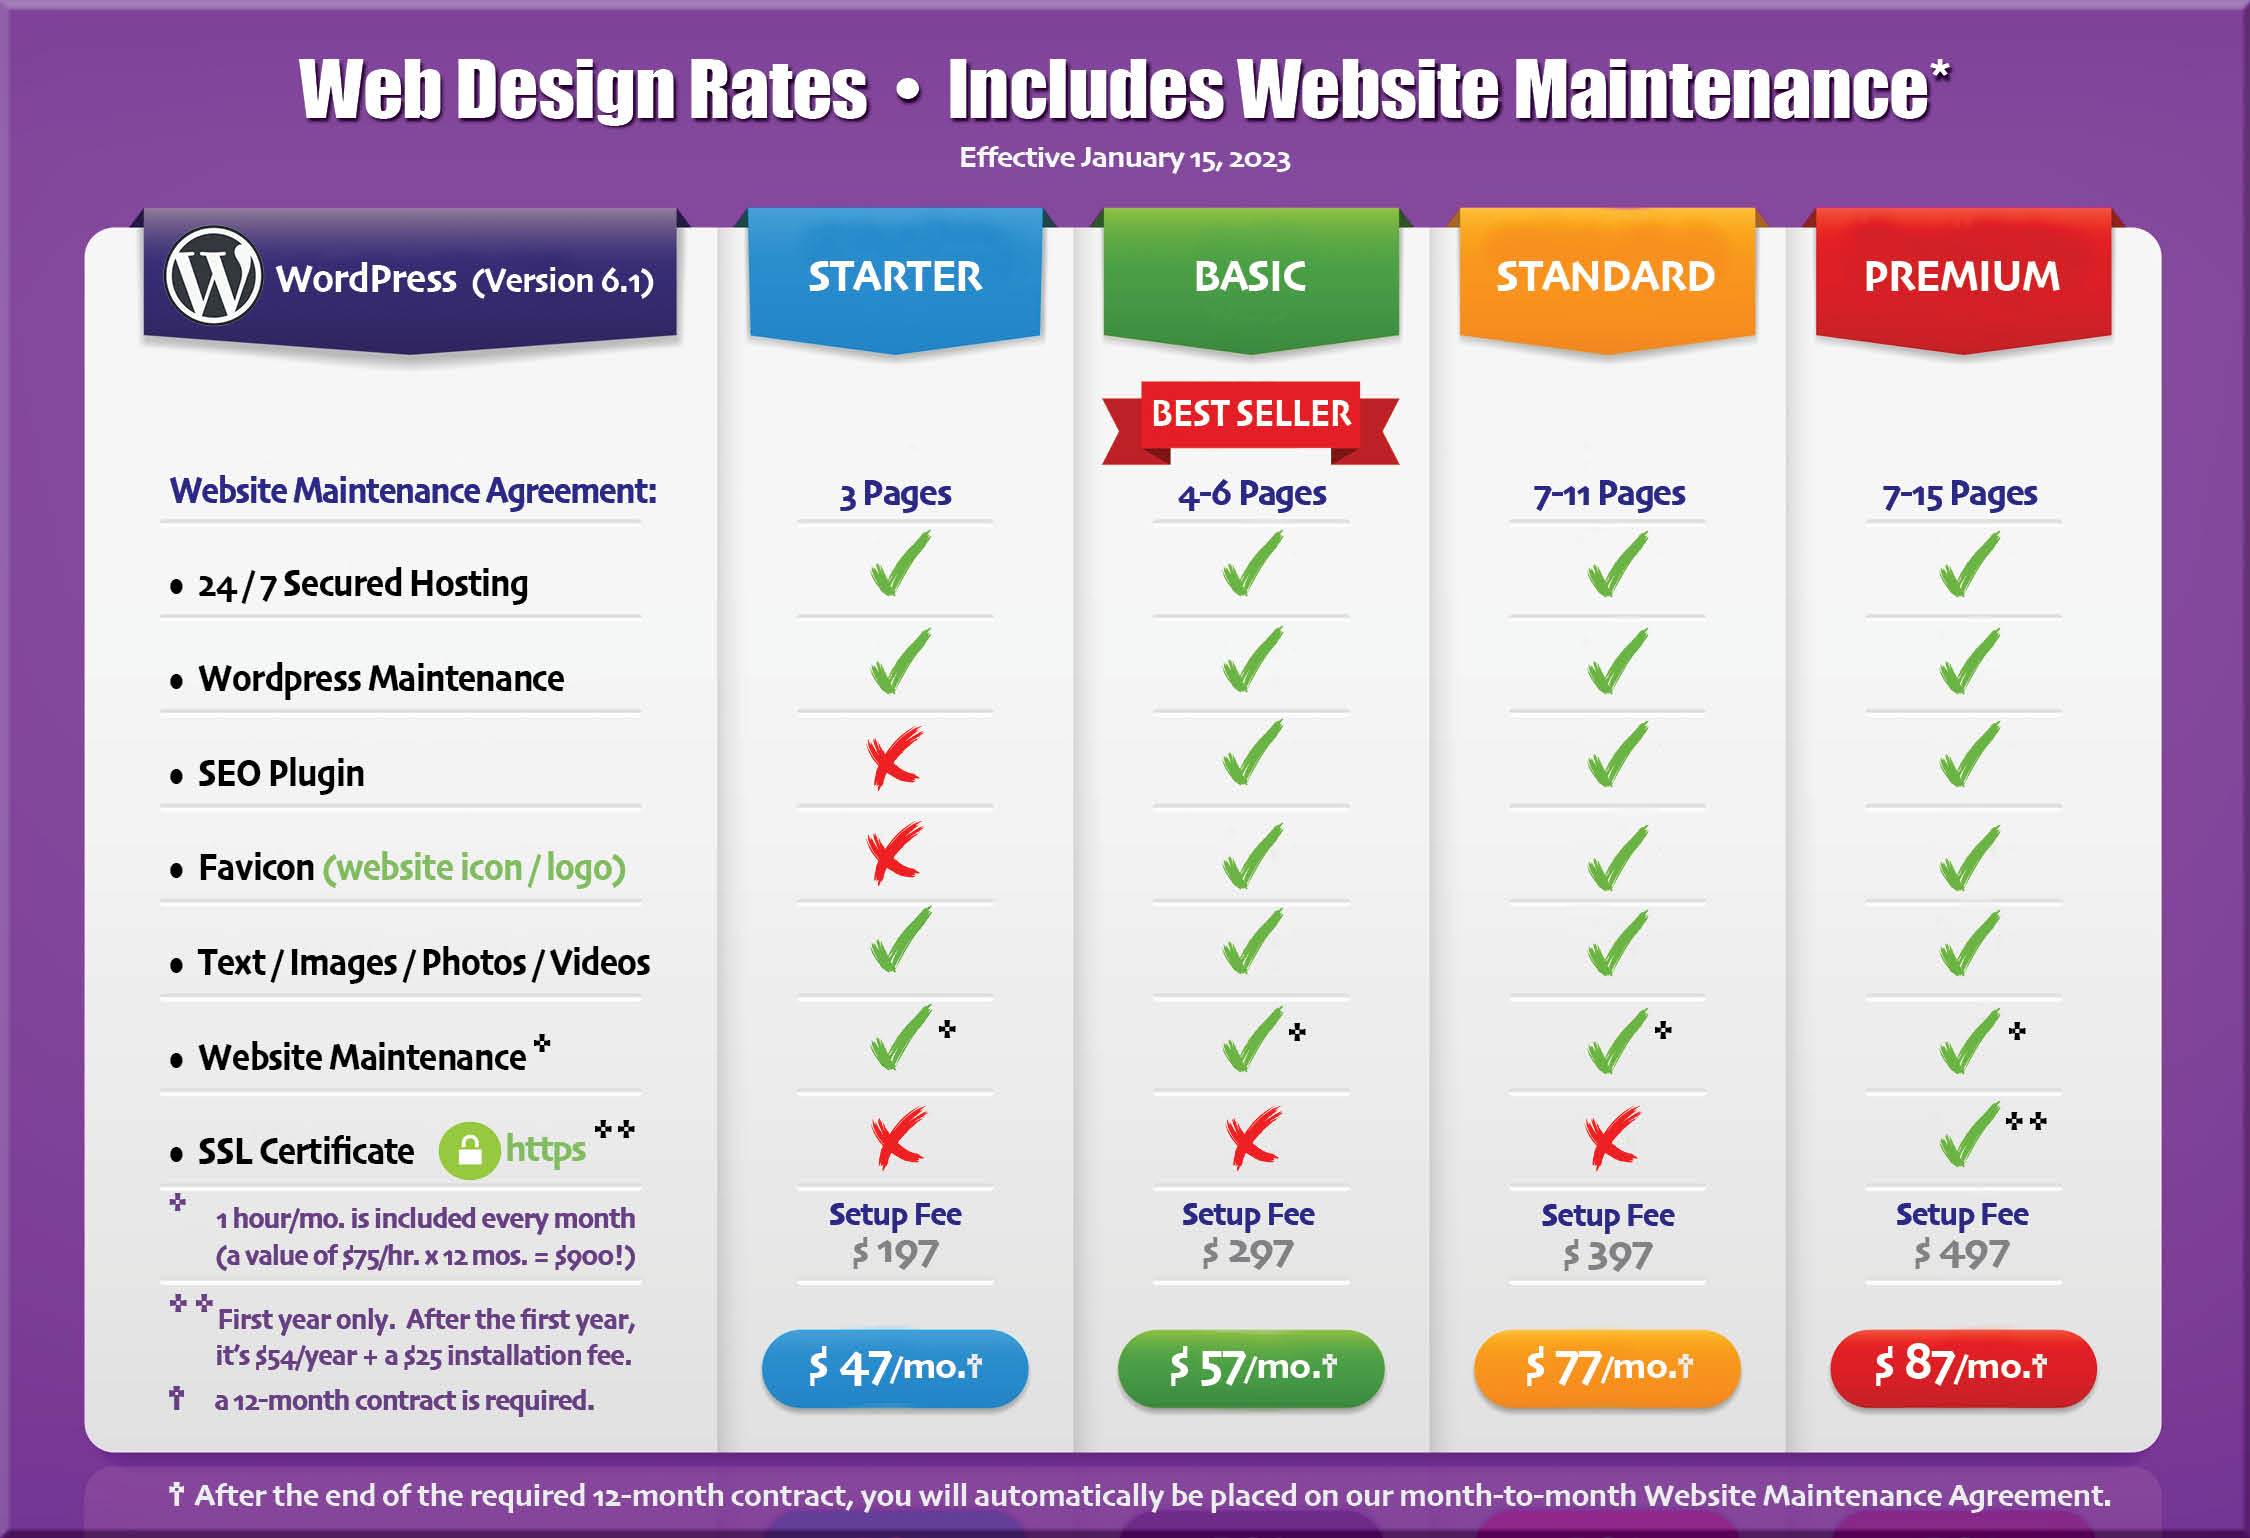 website-rates-effective-january-15-2023